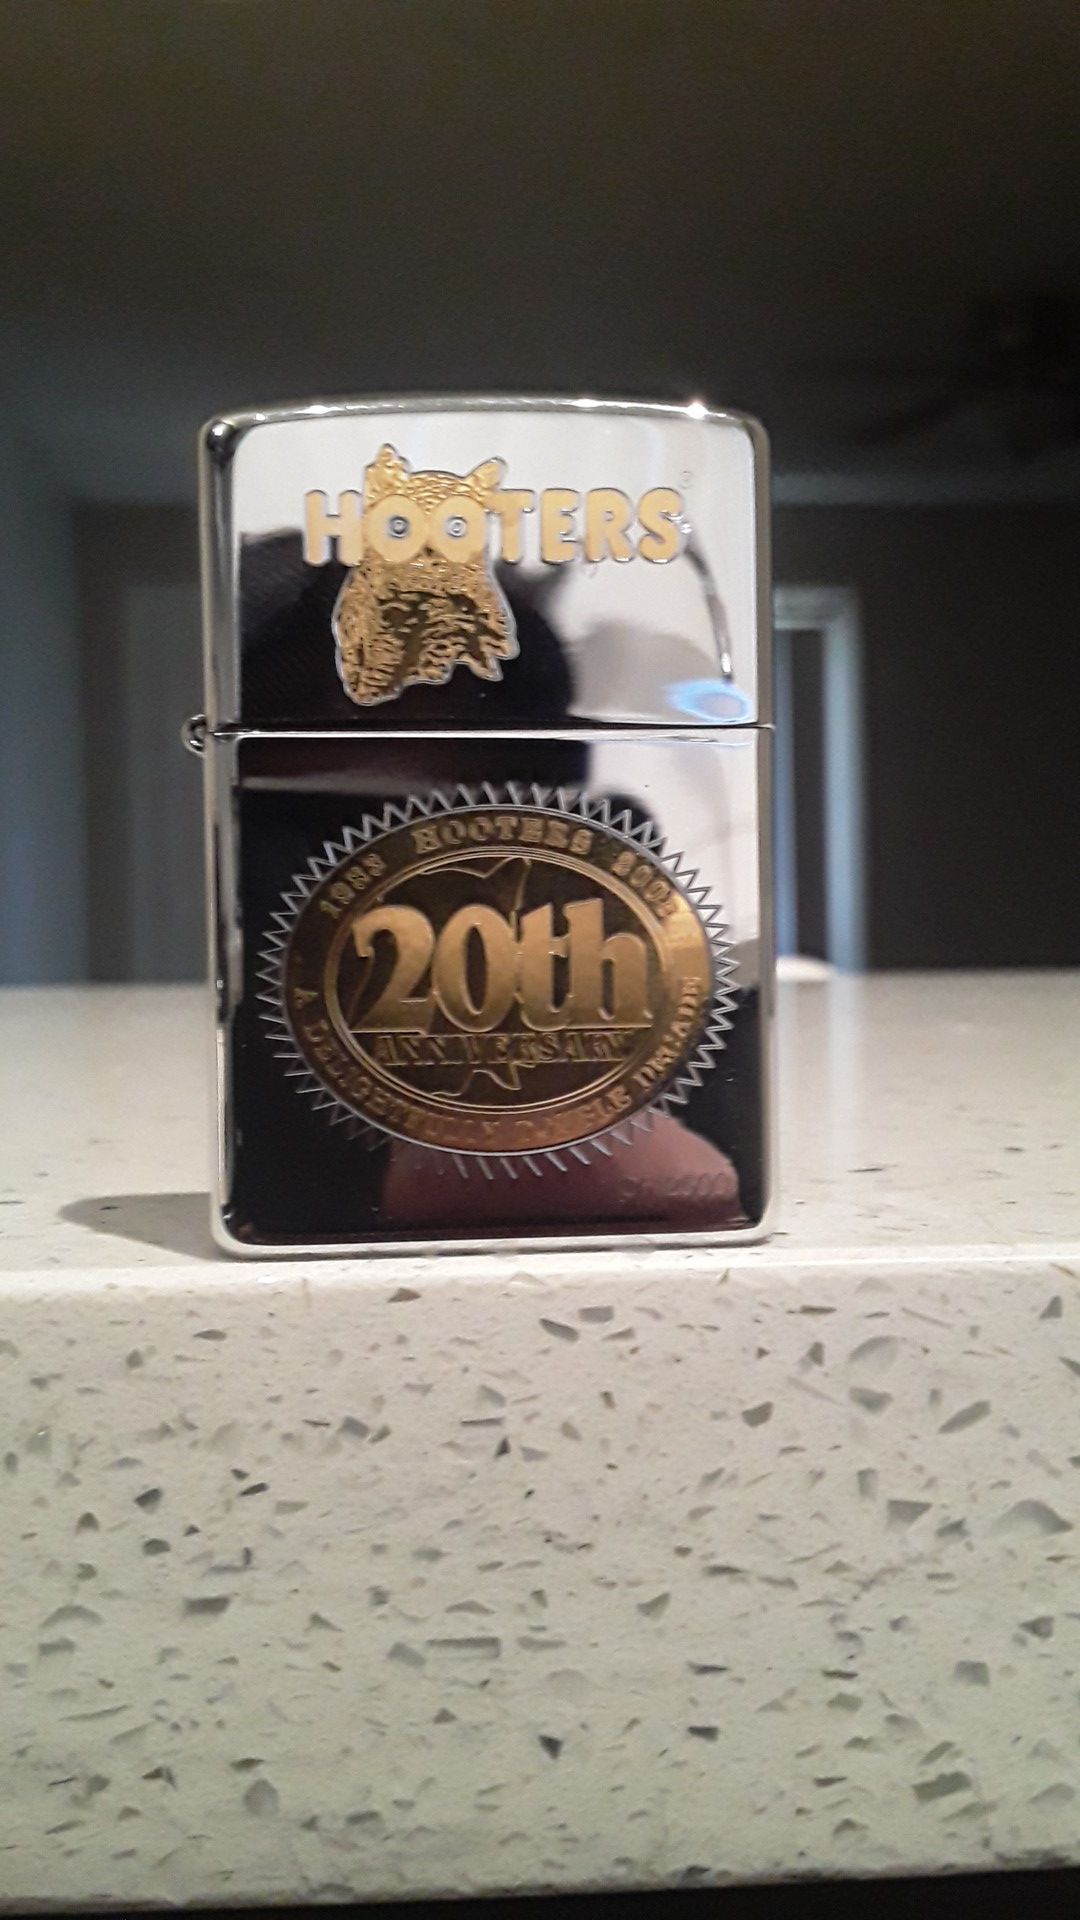 Zippo Lighter Collectible Hooters 20th anniversary. $20.00